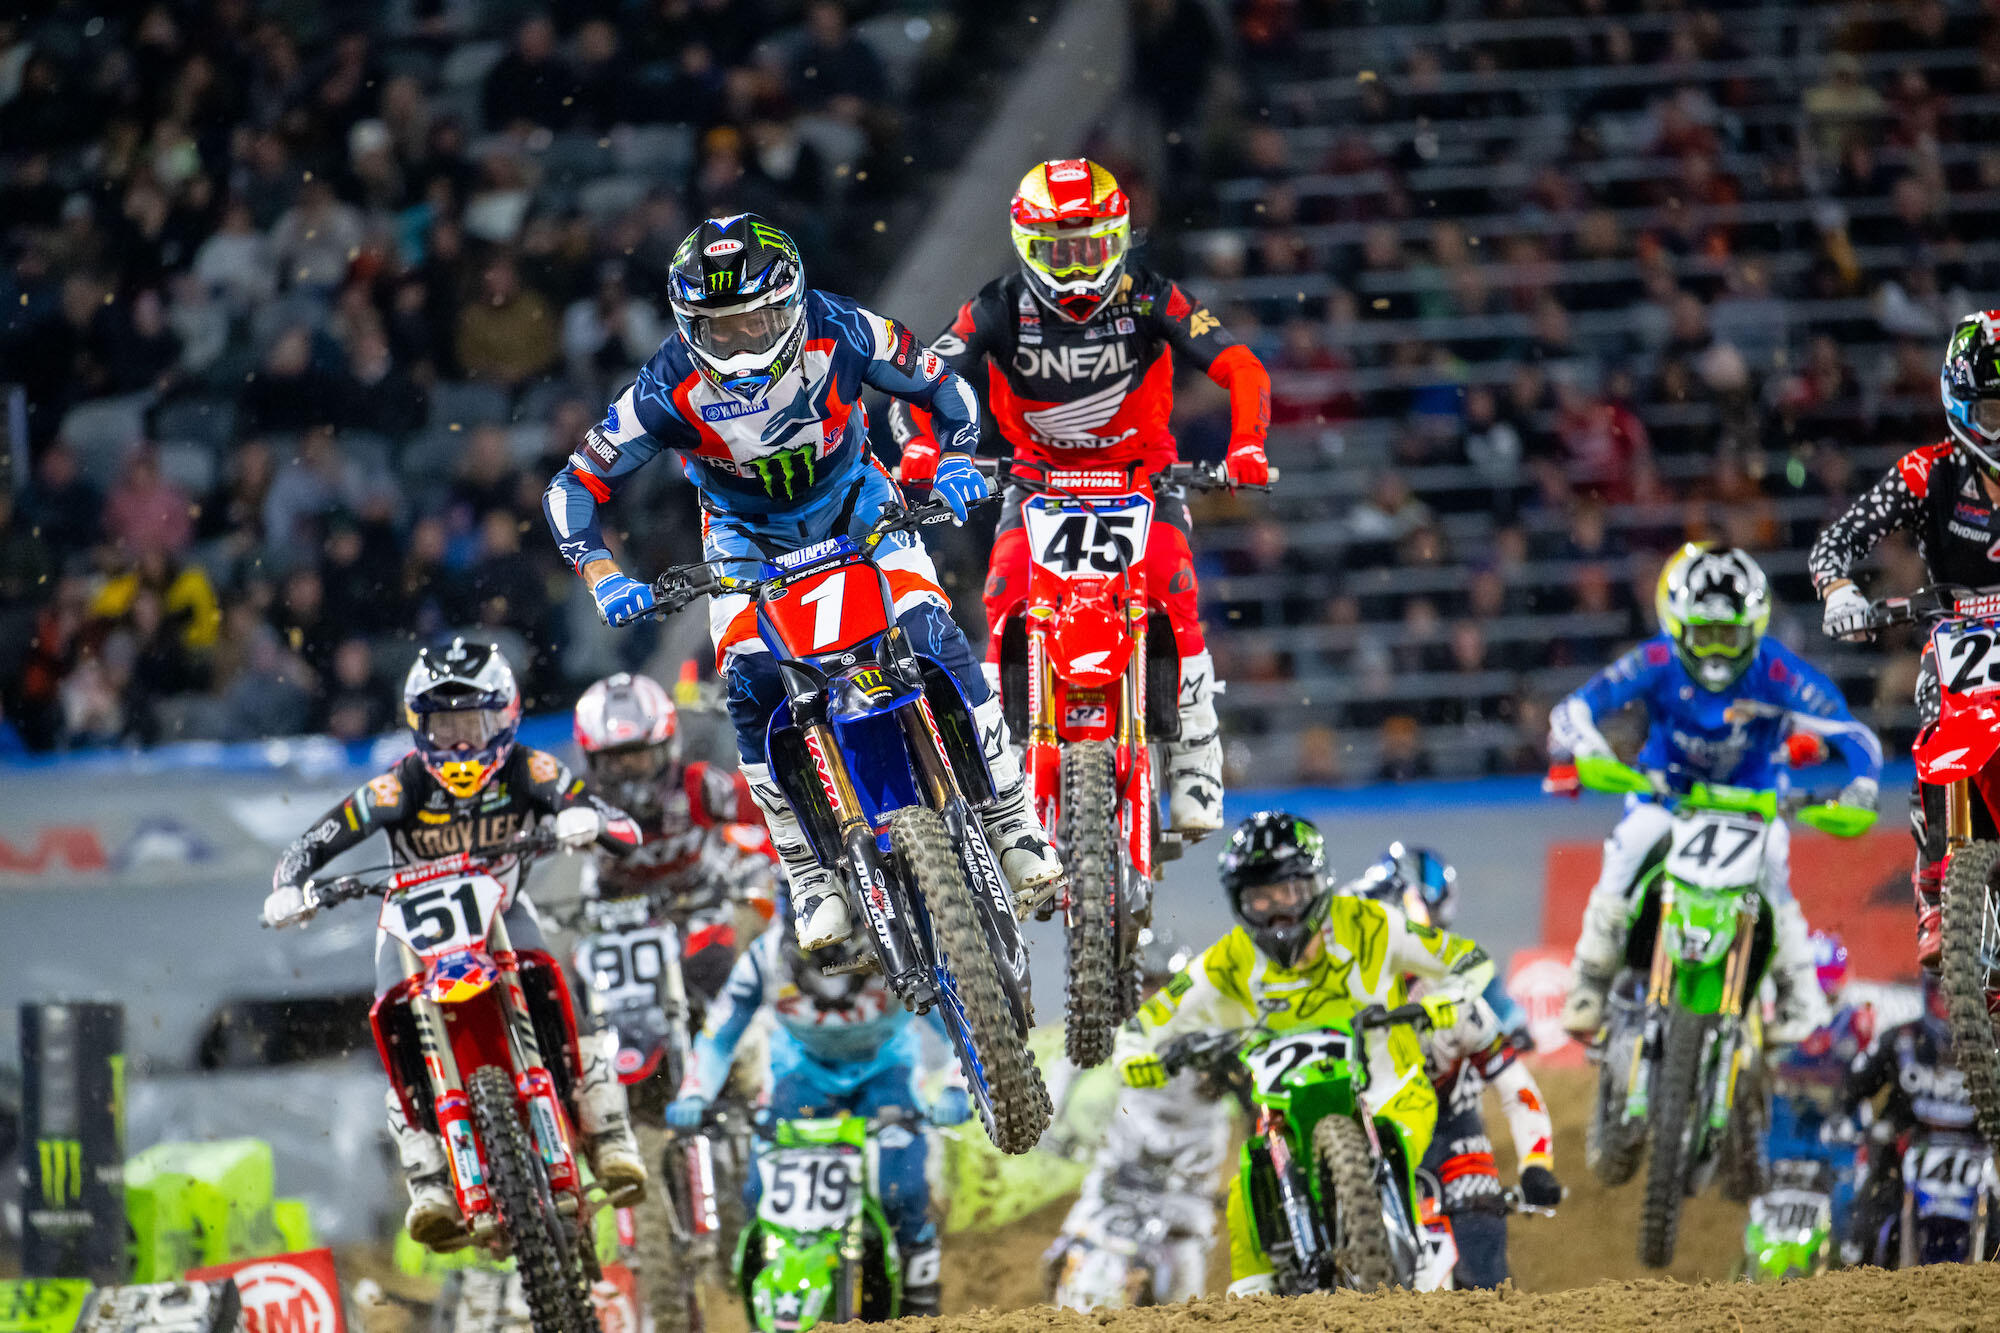 Tomac and Lawrence Win Again in San Diego